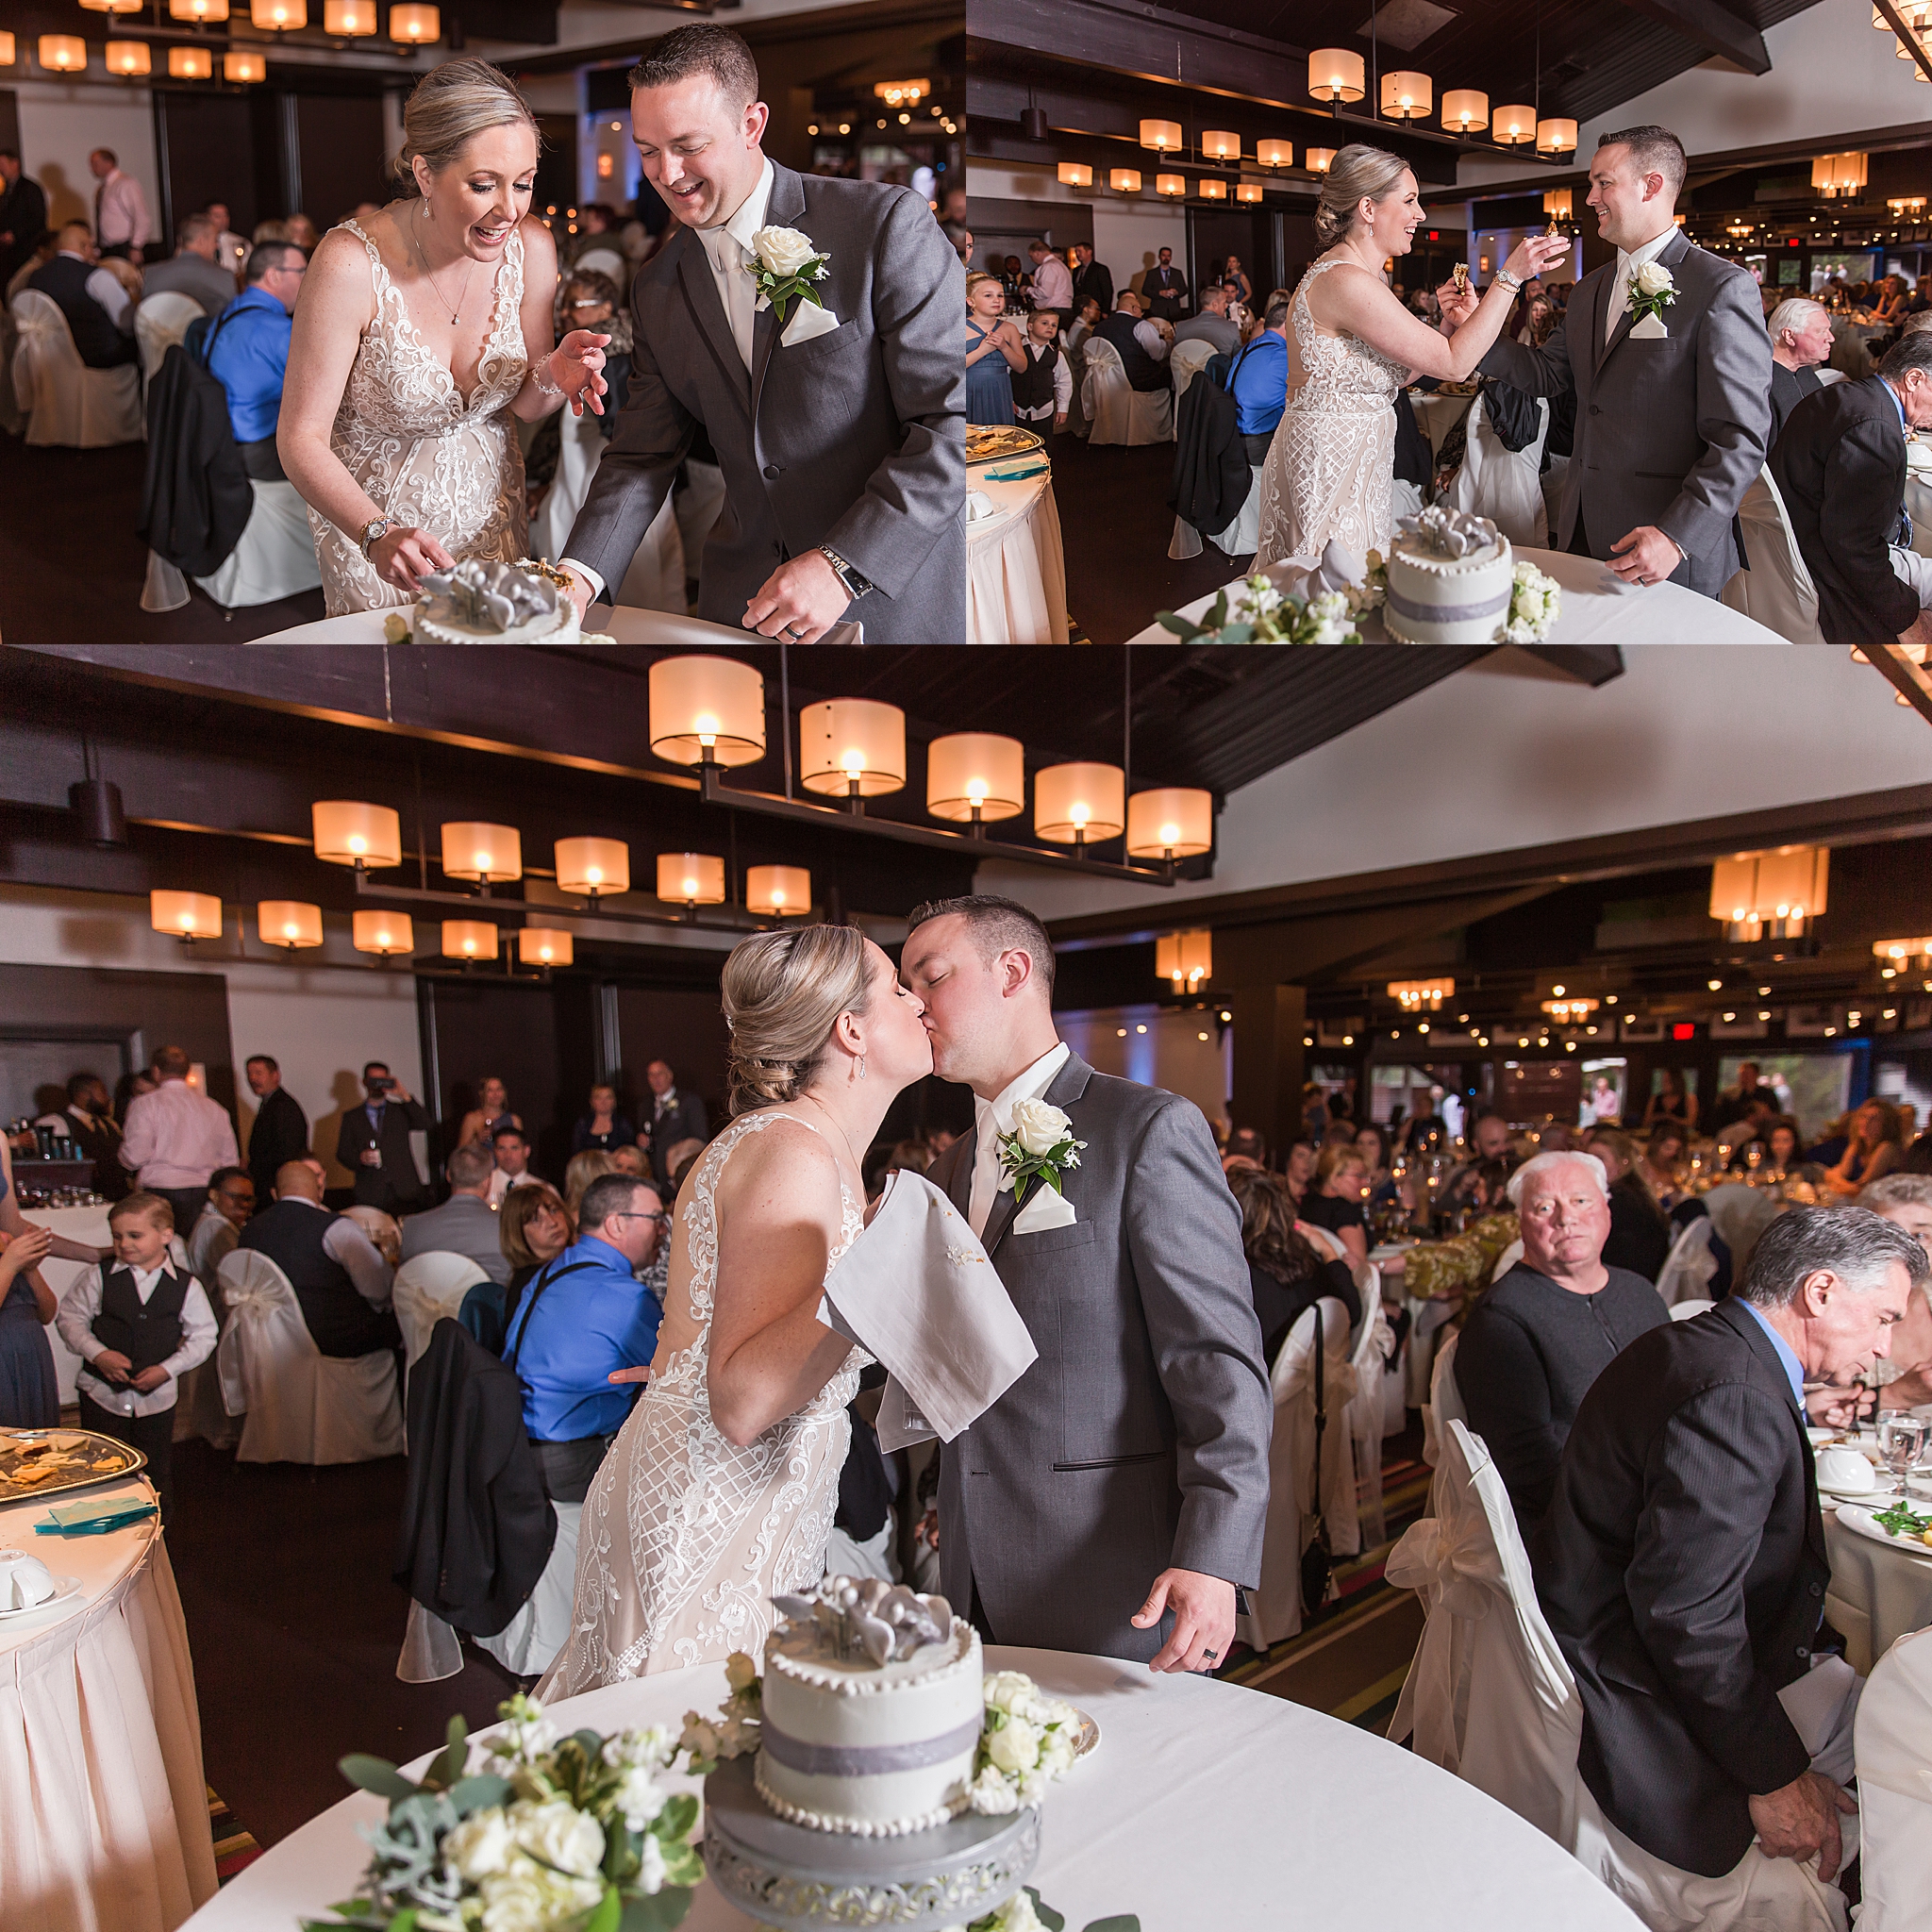 modern-romantic-wedding-photography-at-webers-in-ann-arbor-michigan-by-courtney-carolyn-photography_0077.jpg